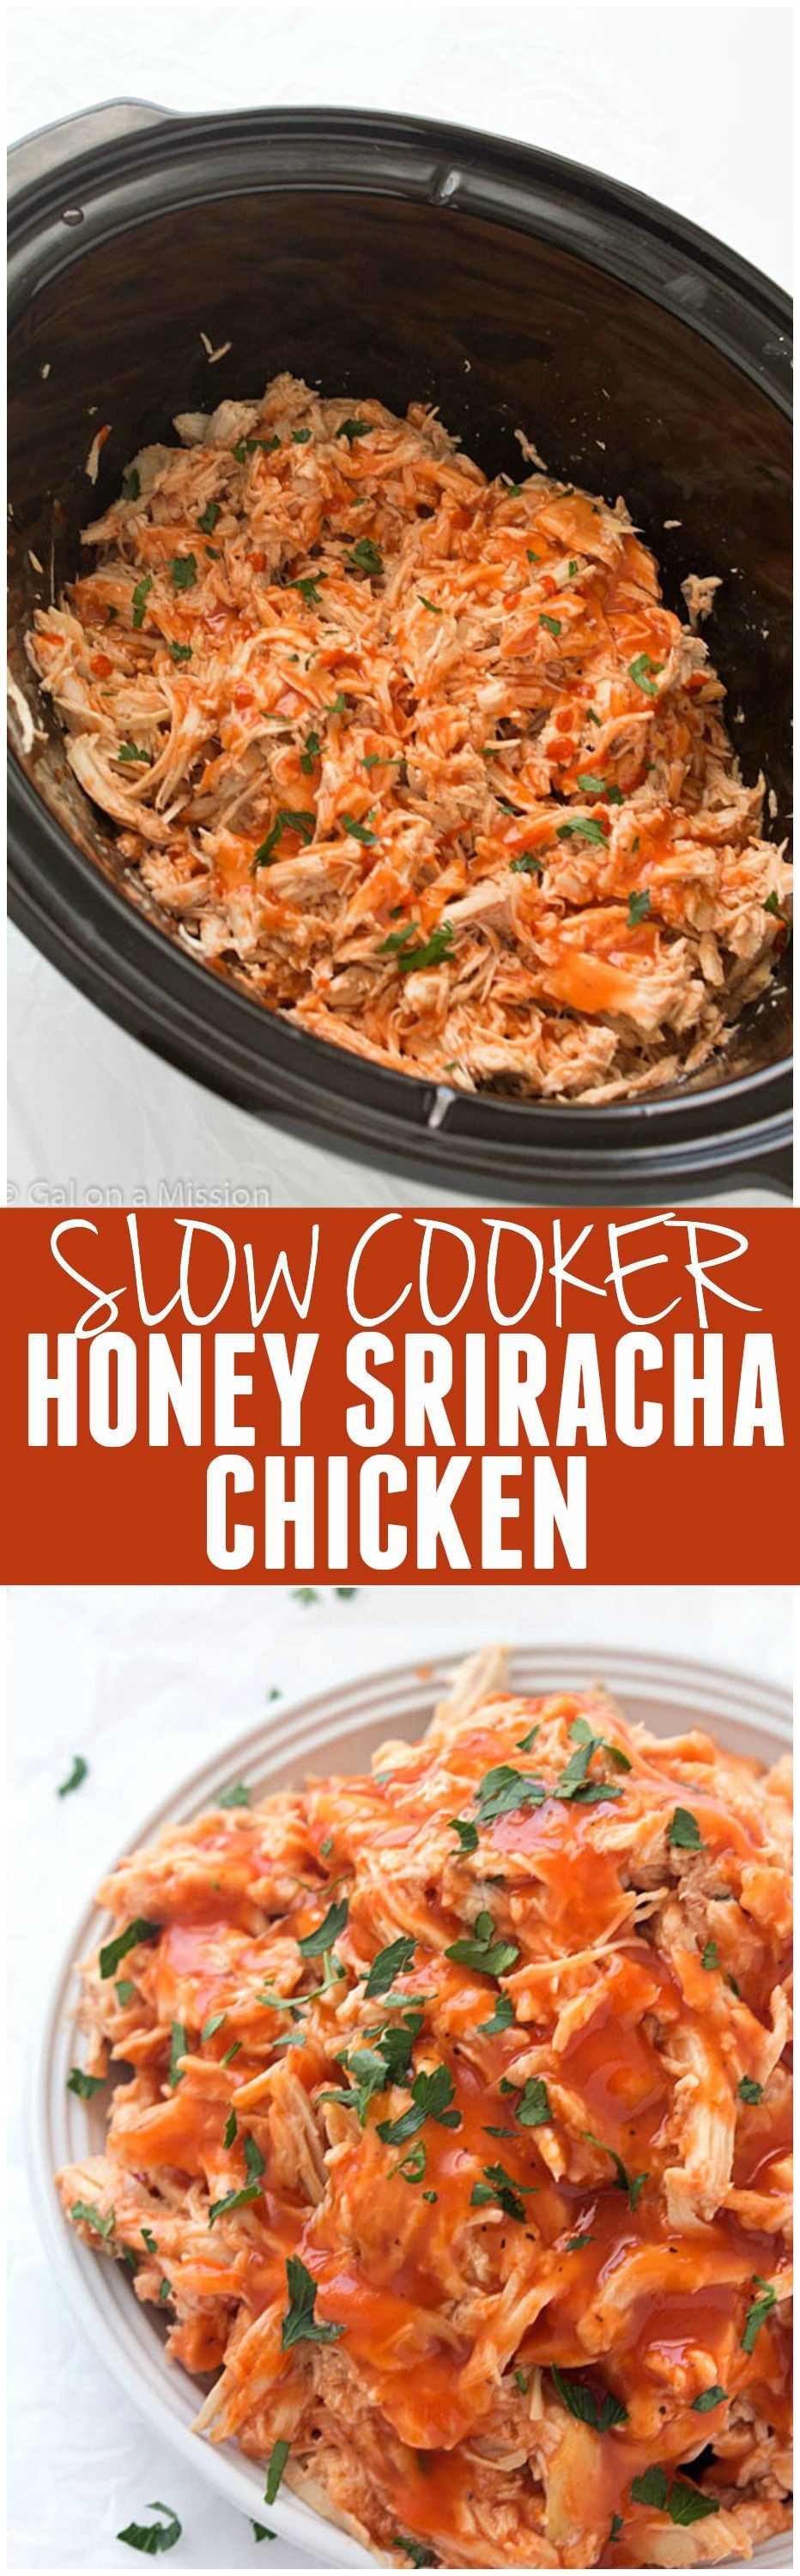 This Slow Cooker Honey Sriracha Chicken is an awesome balance of sweet and spice and the flavor is out of this world!